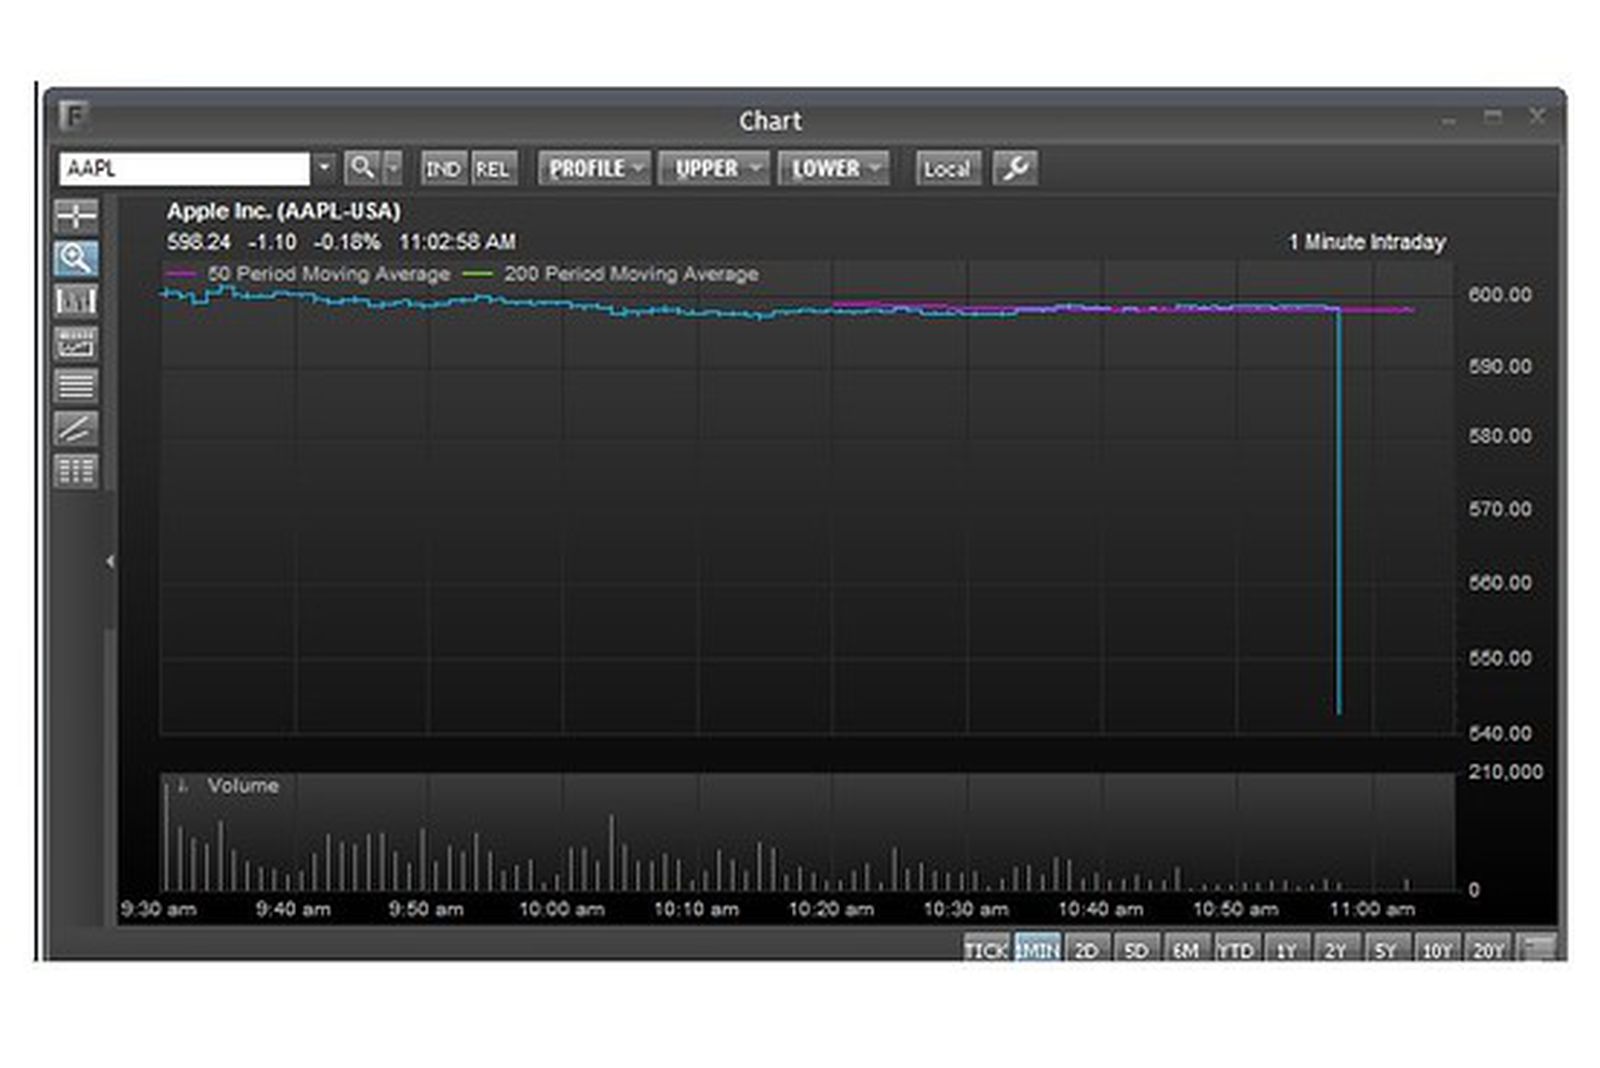 Apple Stock Trading Halted Briefly on Sudden 9% Drop ...